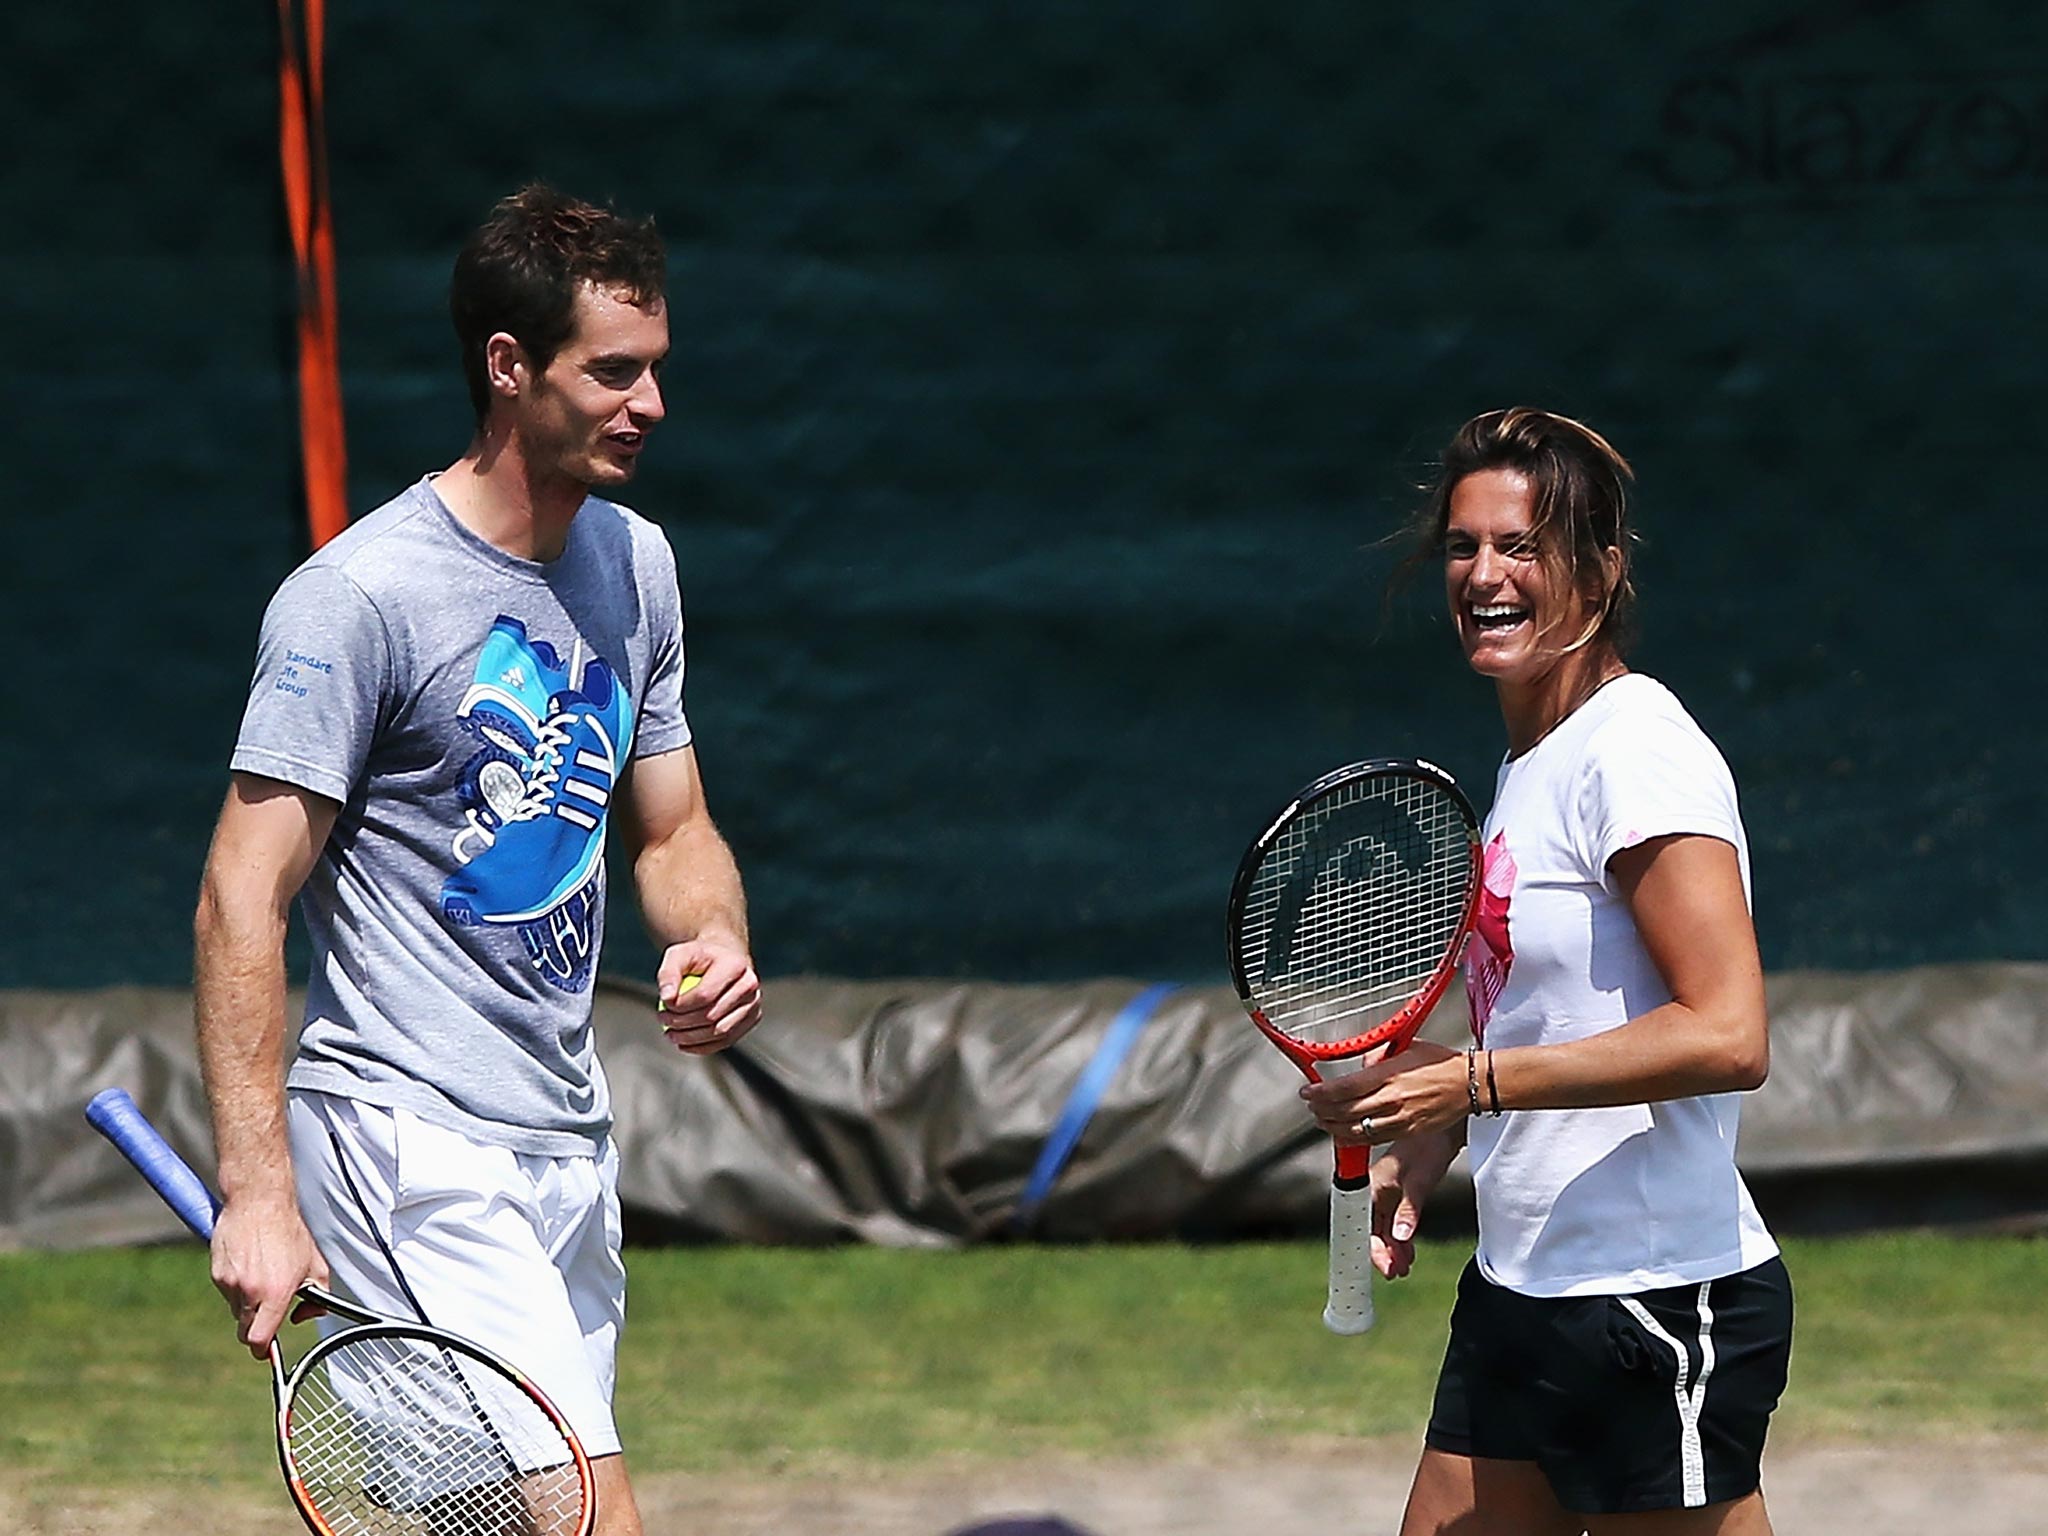 Andy Murray and Amélie Mauresmo are working together in Miami